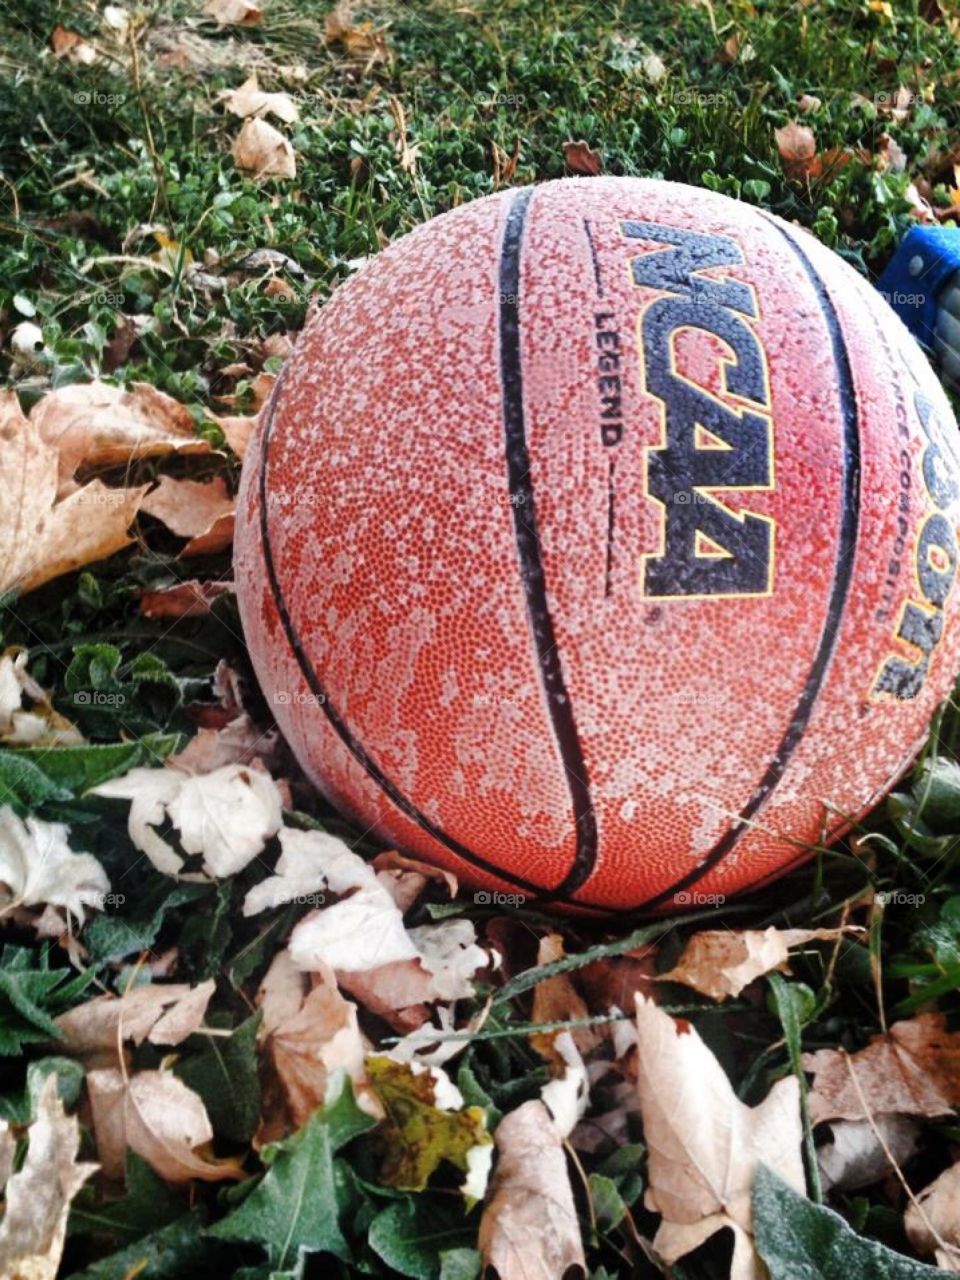 Frost on the basketball 